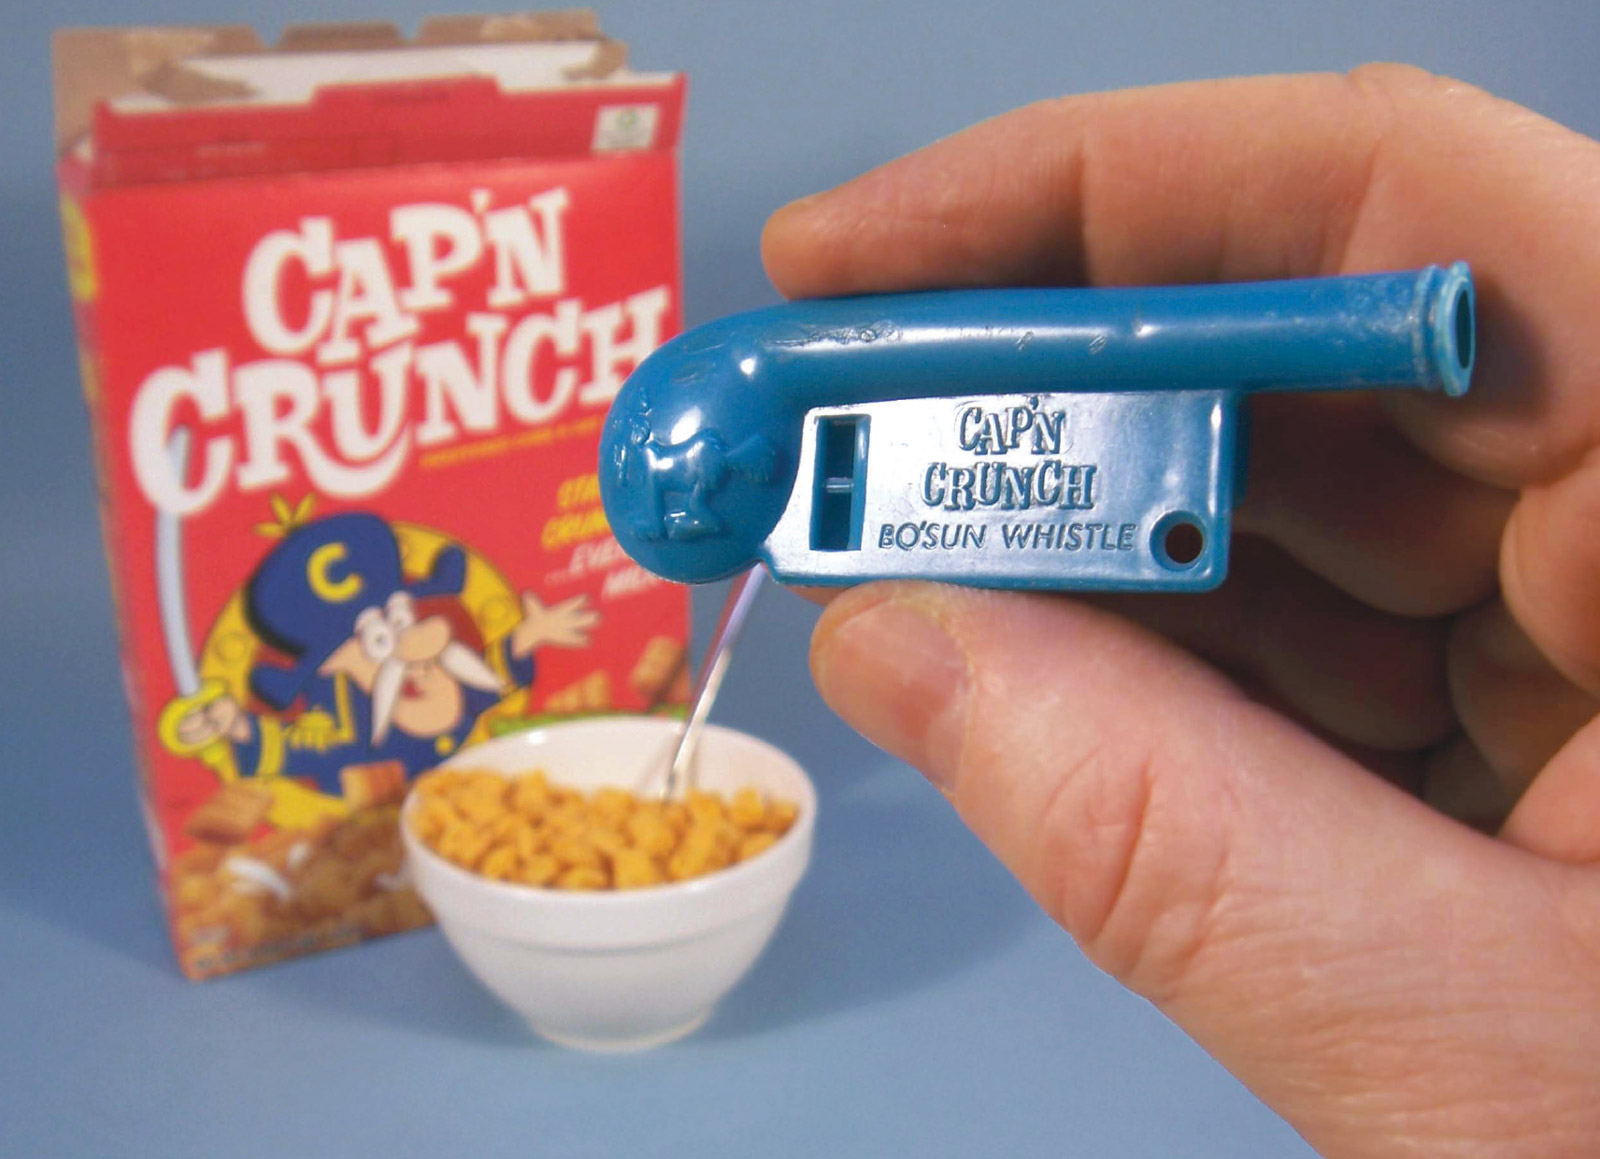 A postcard depicting a photograph of a Cap’n Crunch plastic toy whistle, and a bowl of the cereal next to a Cap’n Crunch box.